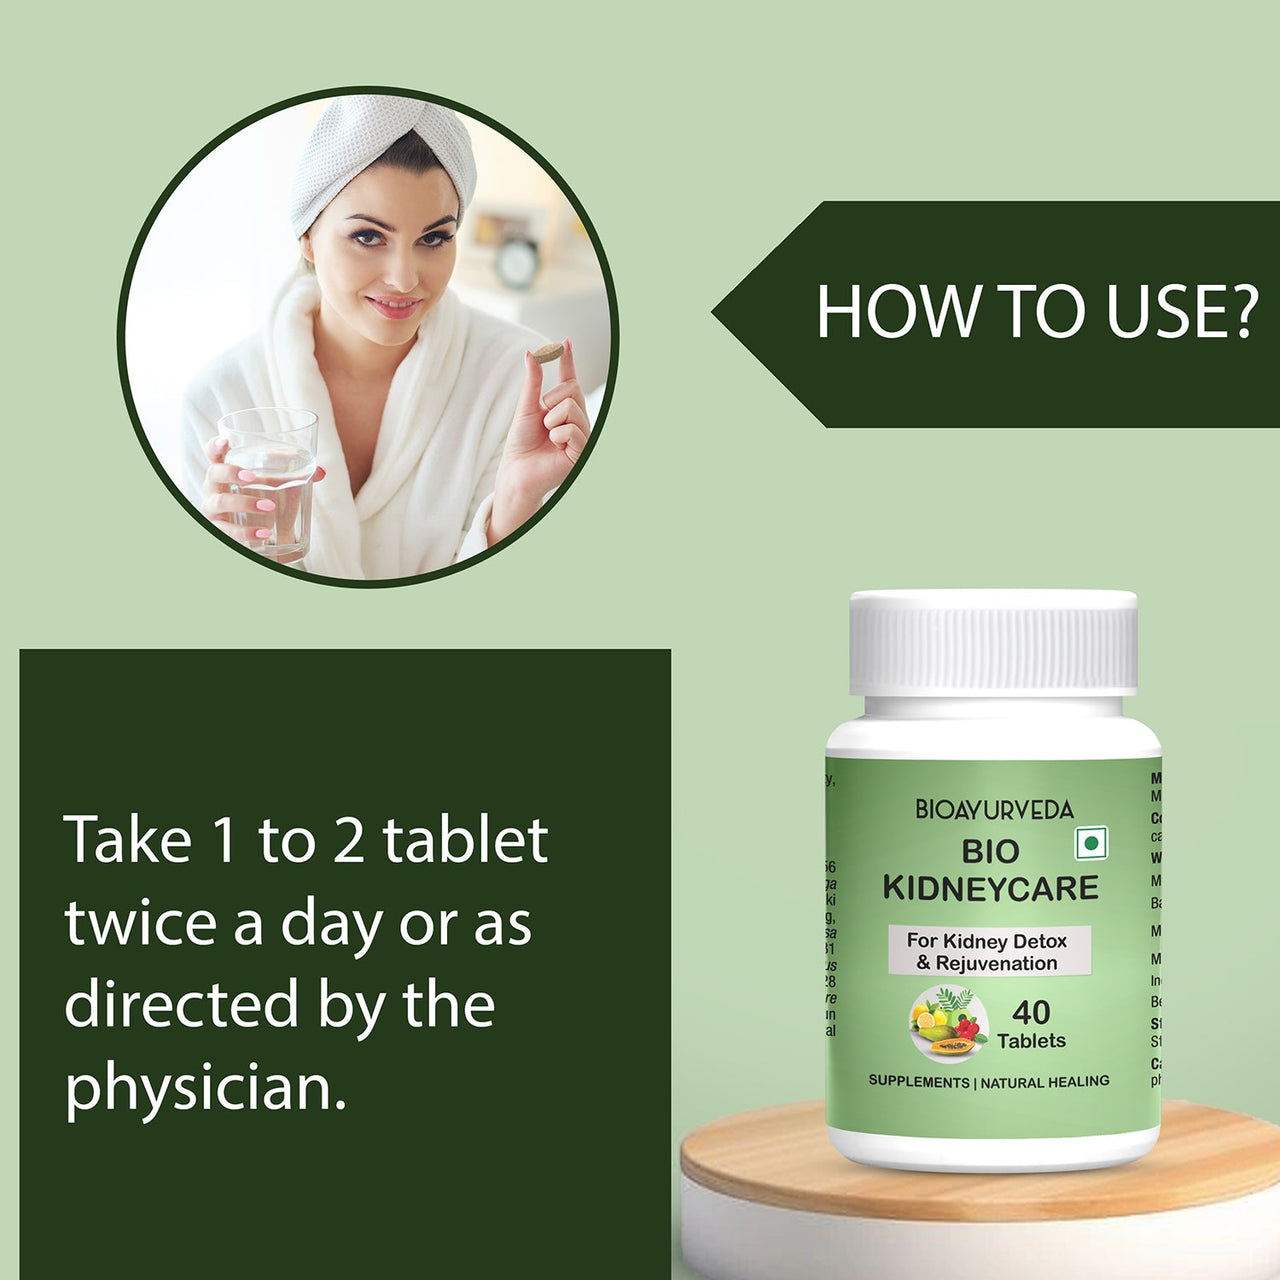 How To Use Bio Kidneycare Tablet